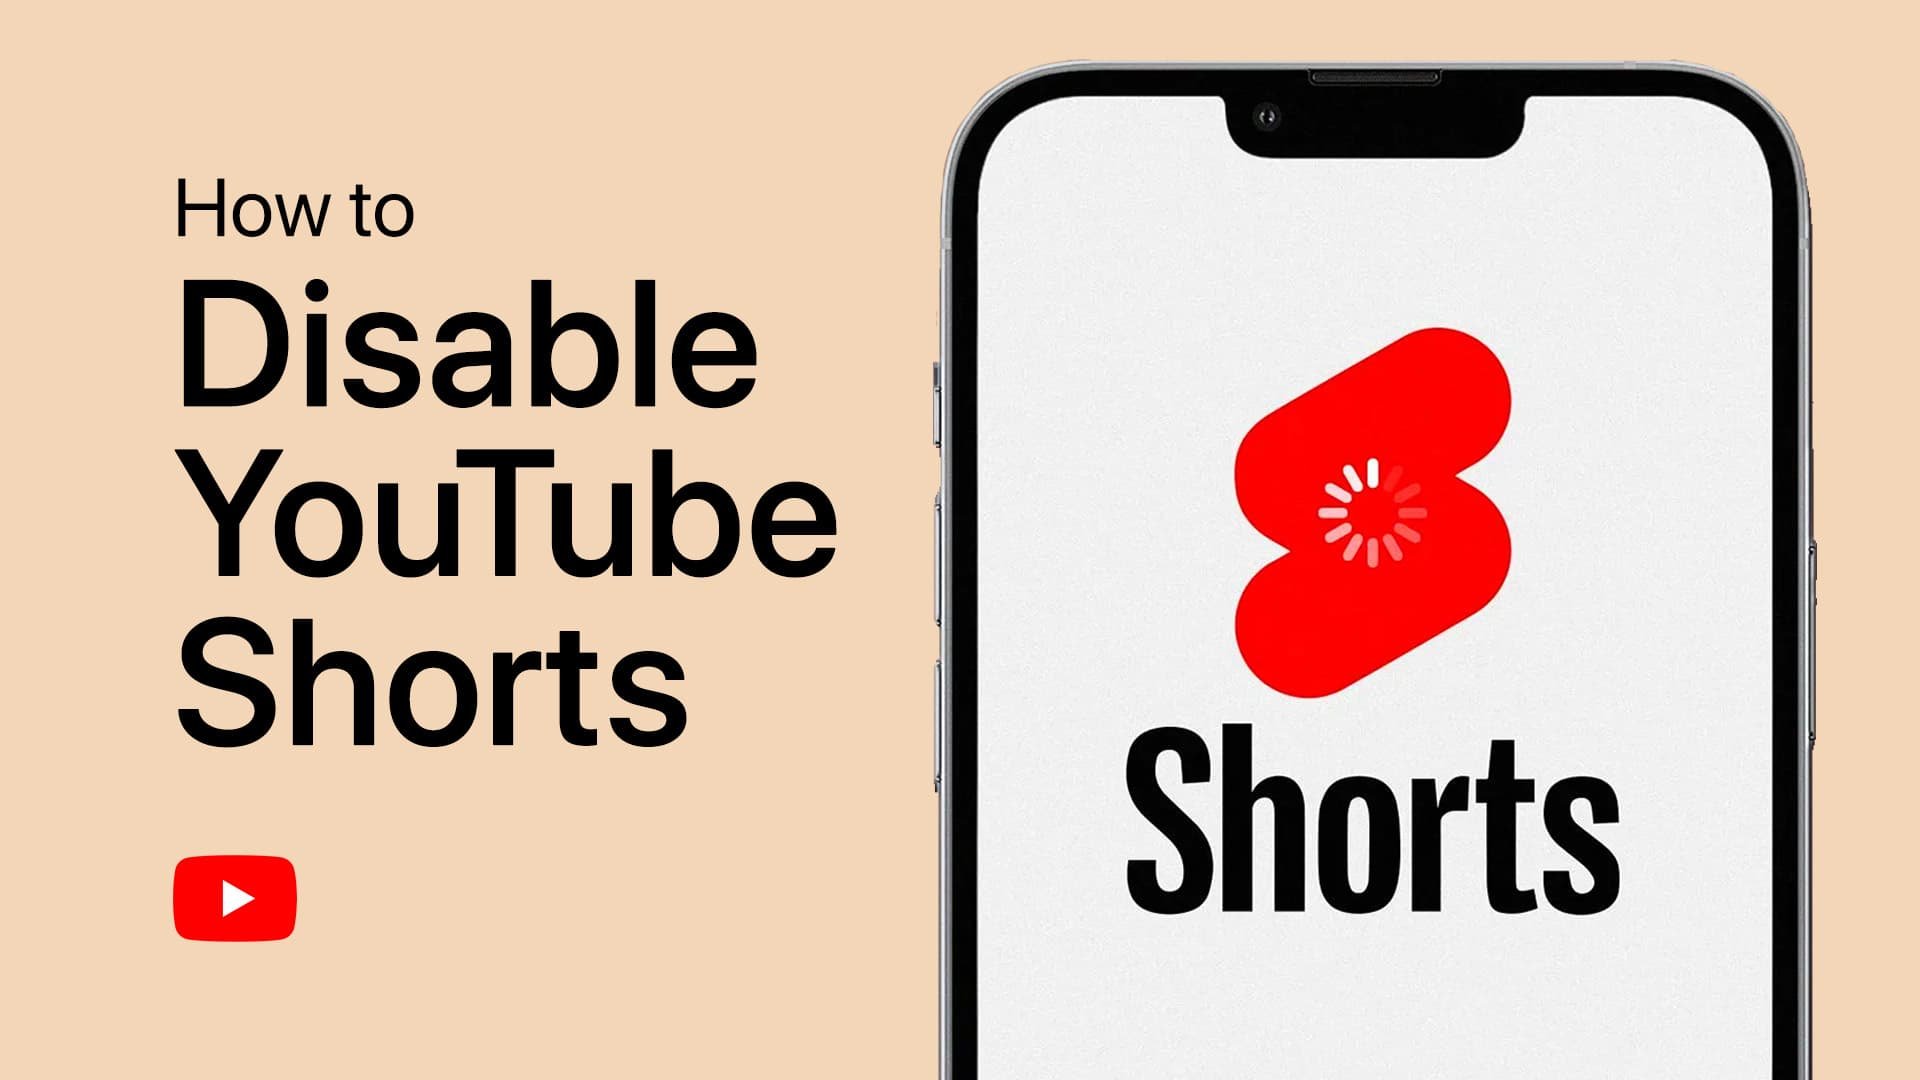 How To Download YouTube Videos - Complete Guide — Tech How